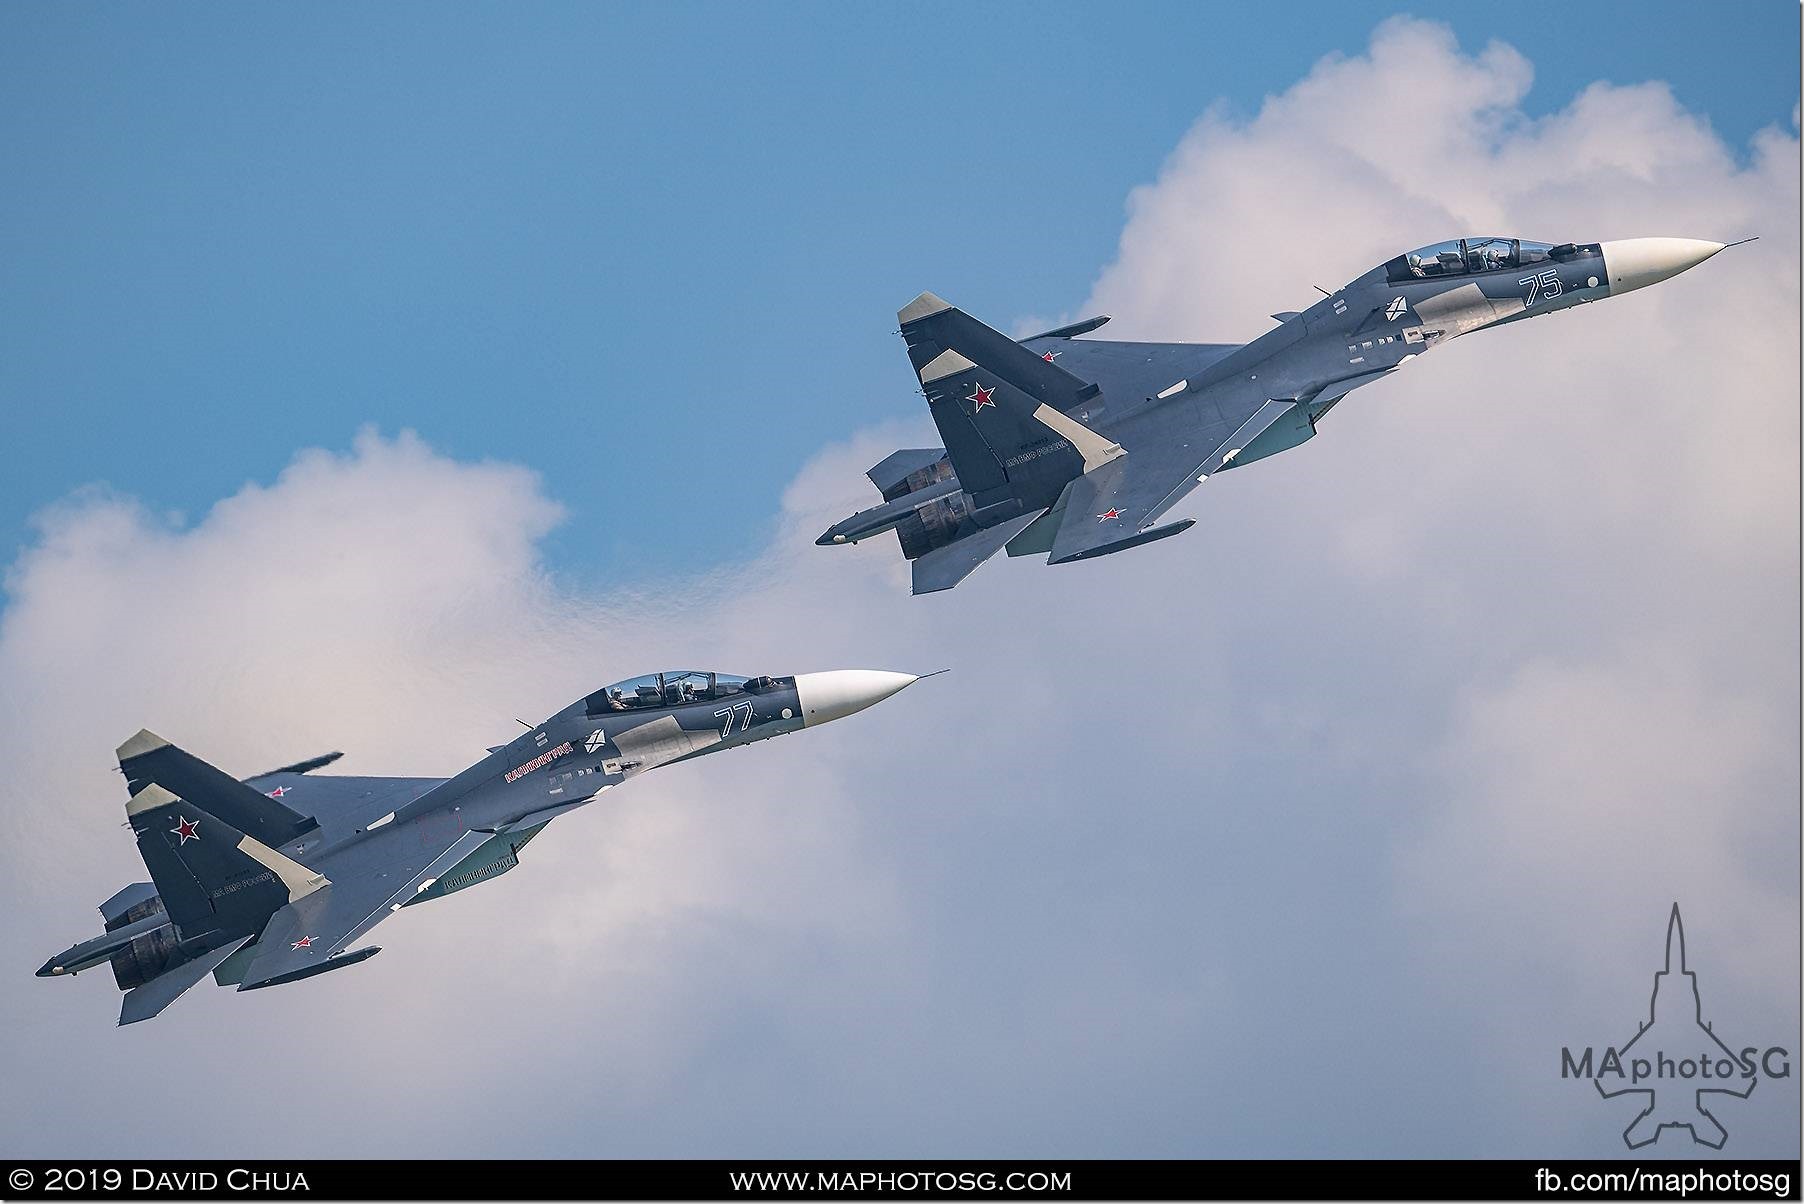 A pair of Russian Navy Sukhoi Su-30SM fighers in formation